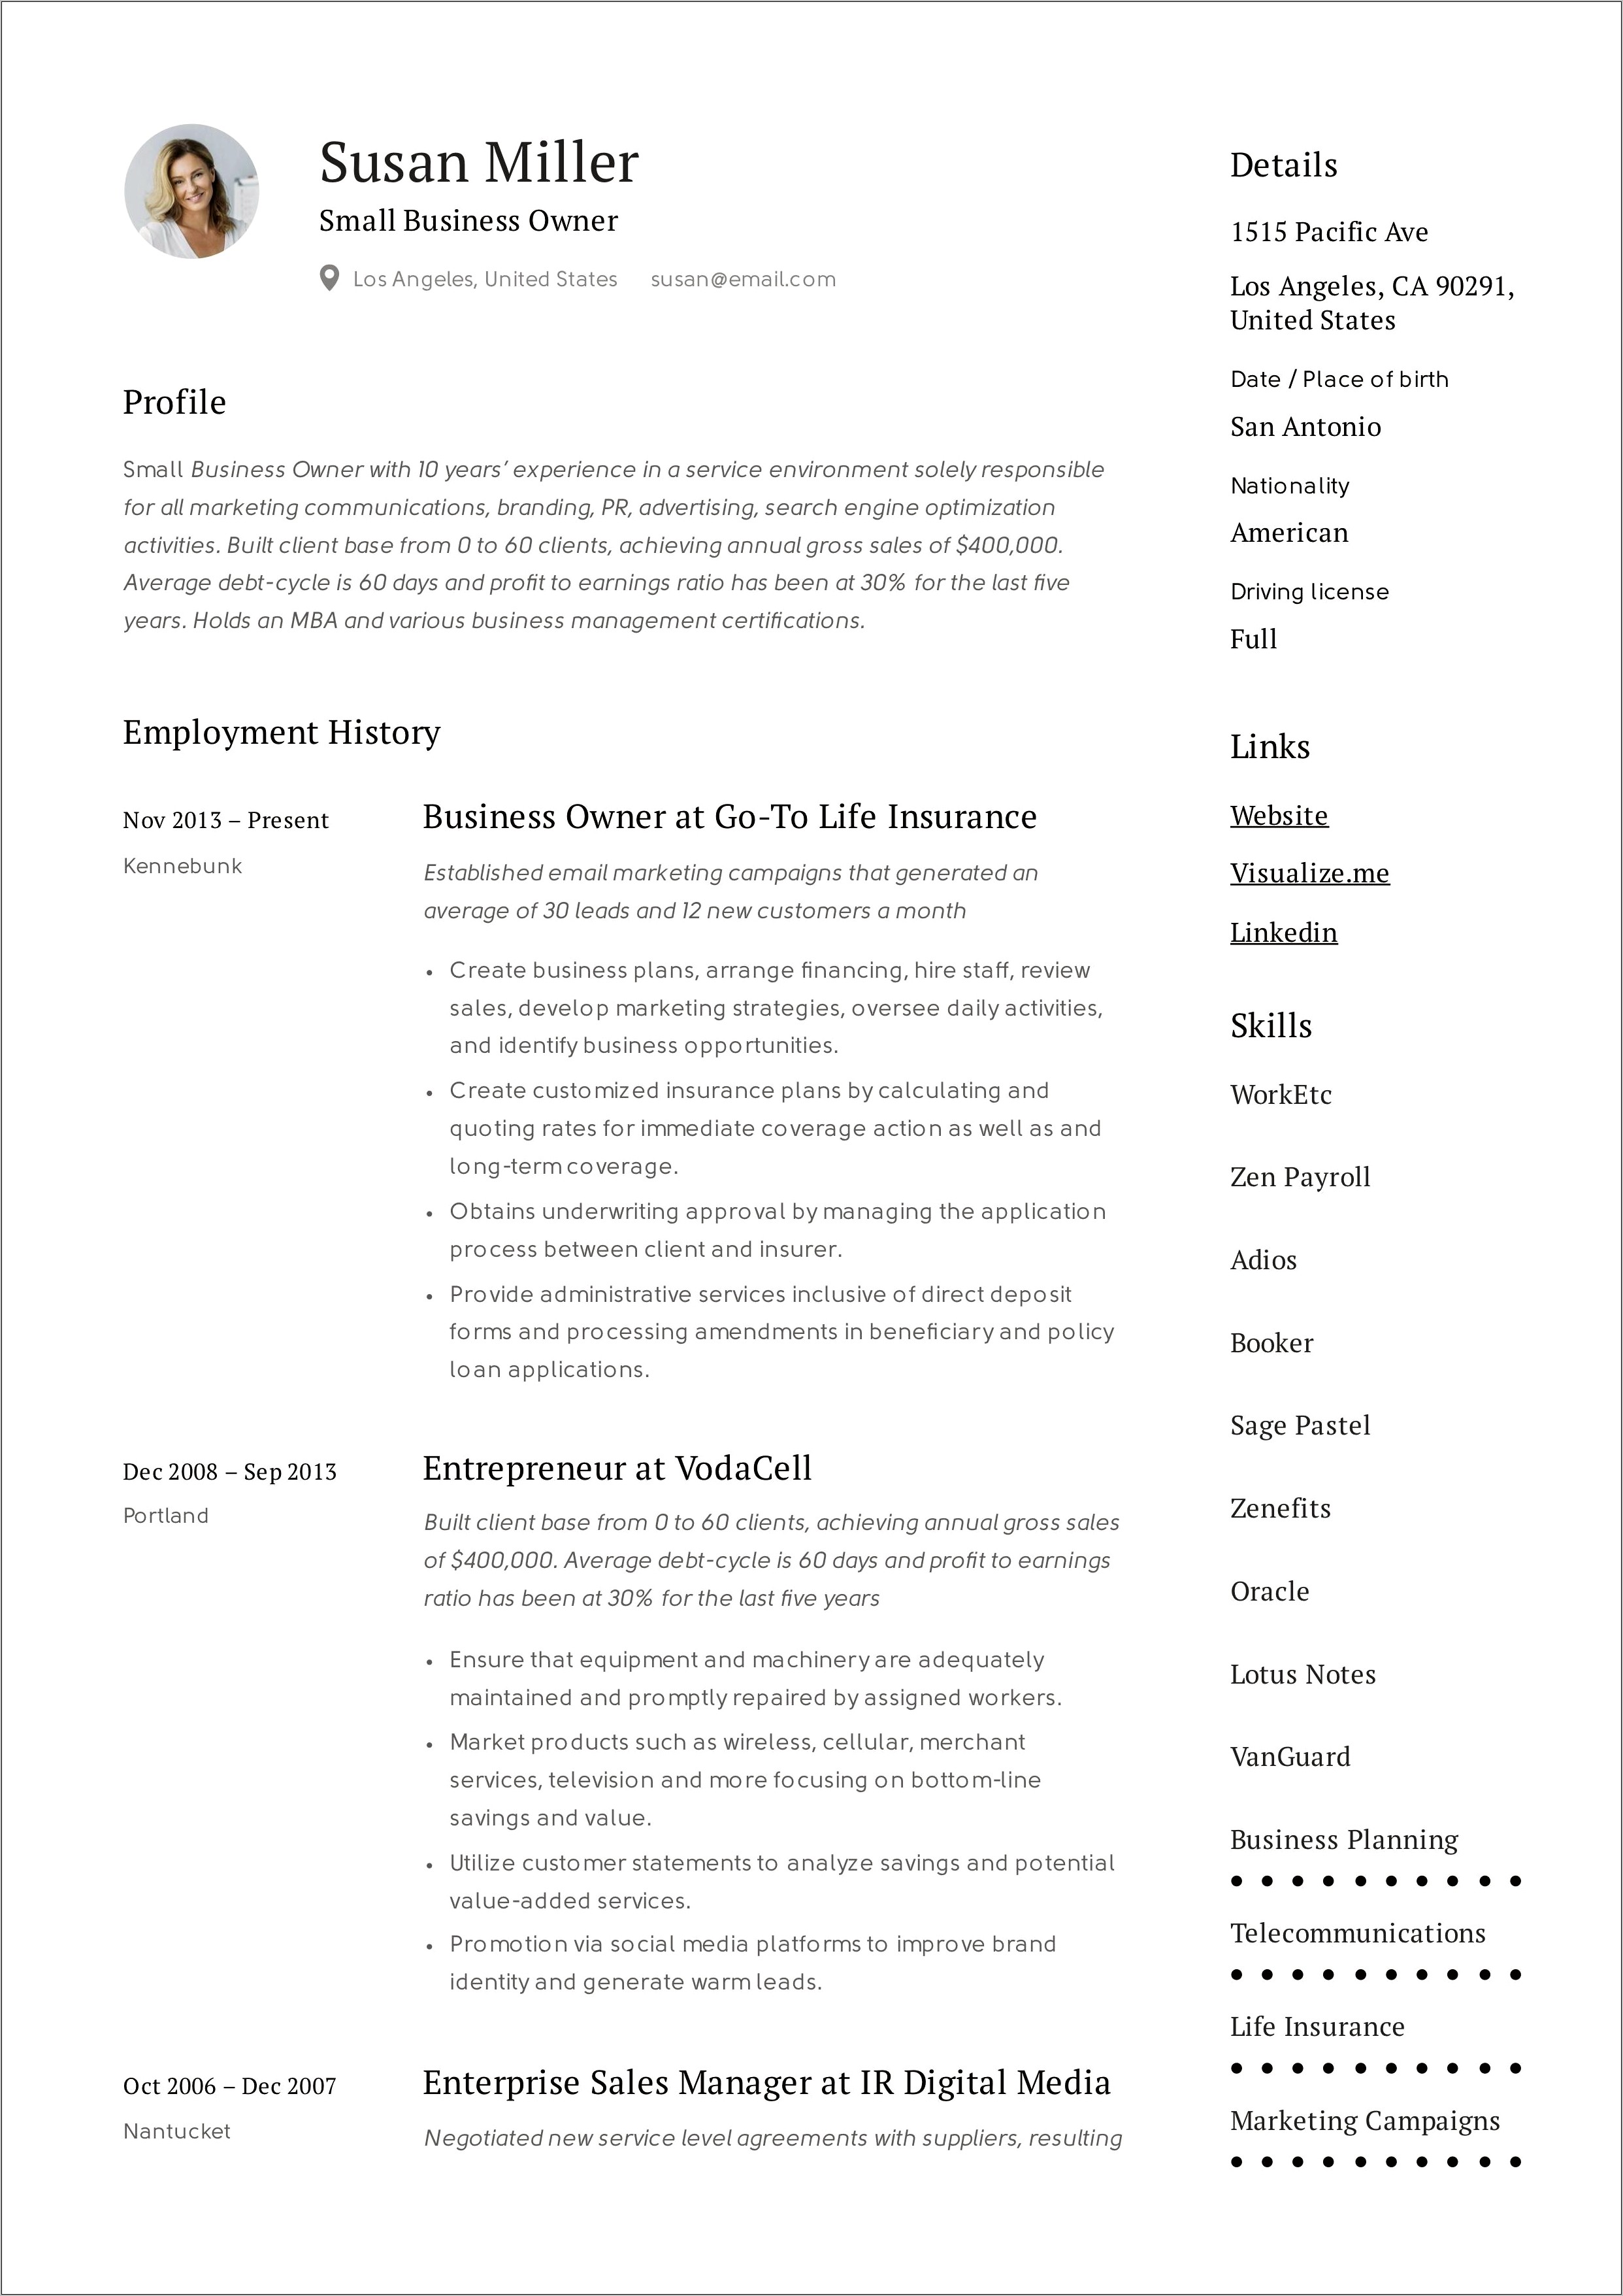 Example Resume With Personal Business